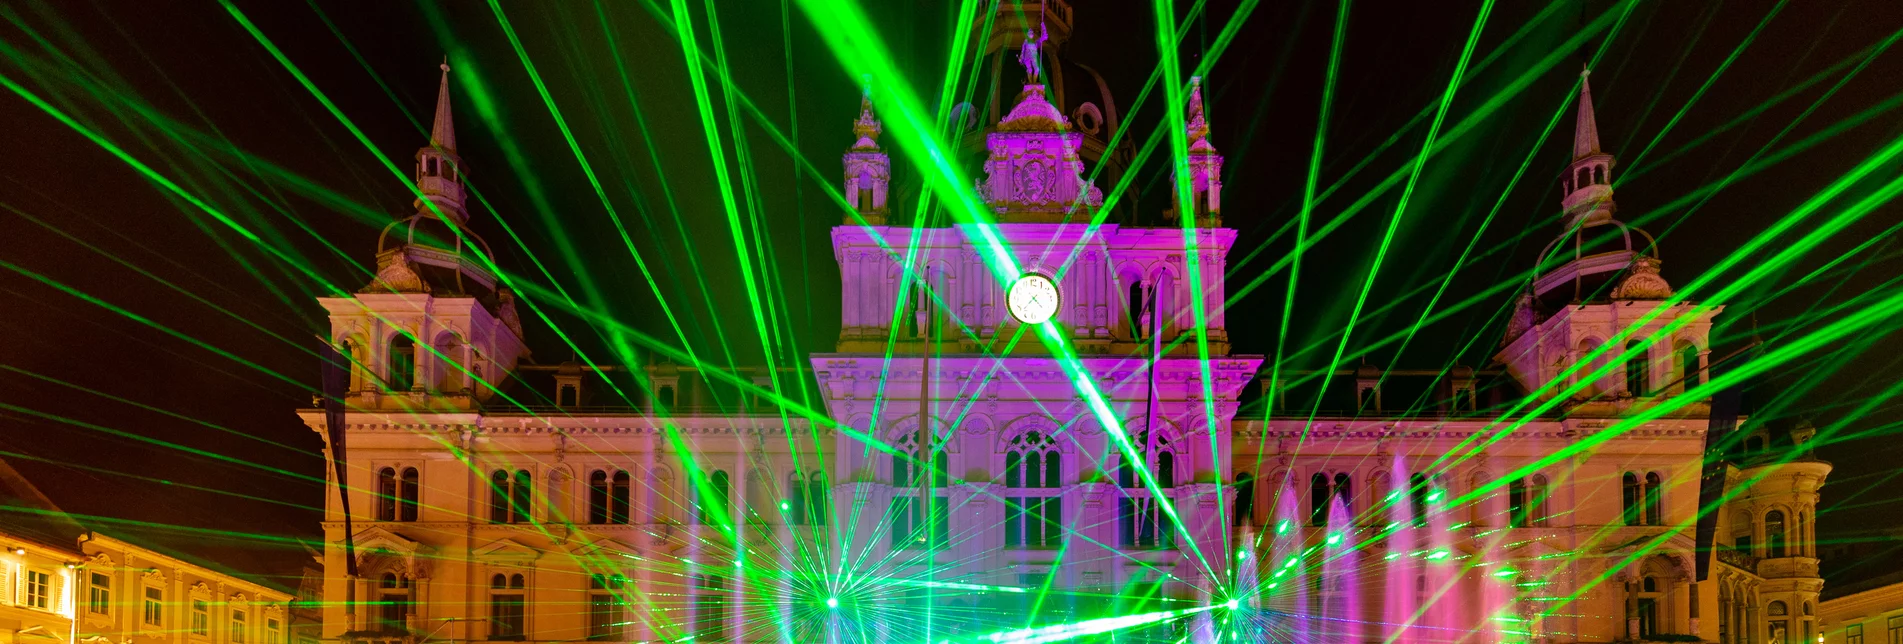 New Year's Eve spectacle on Graz main square | © Graz Tourism | Harry Schiffer